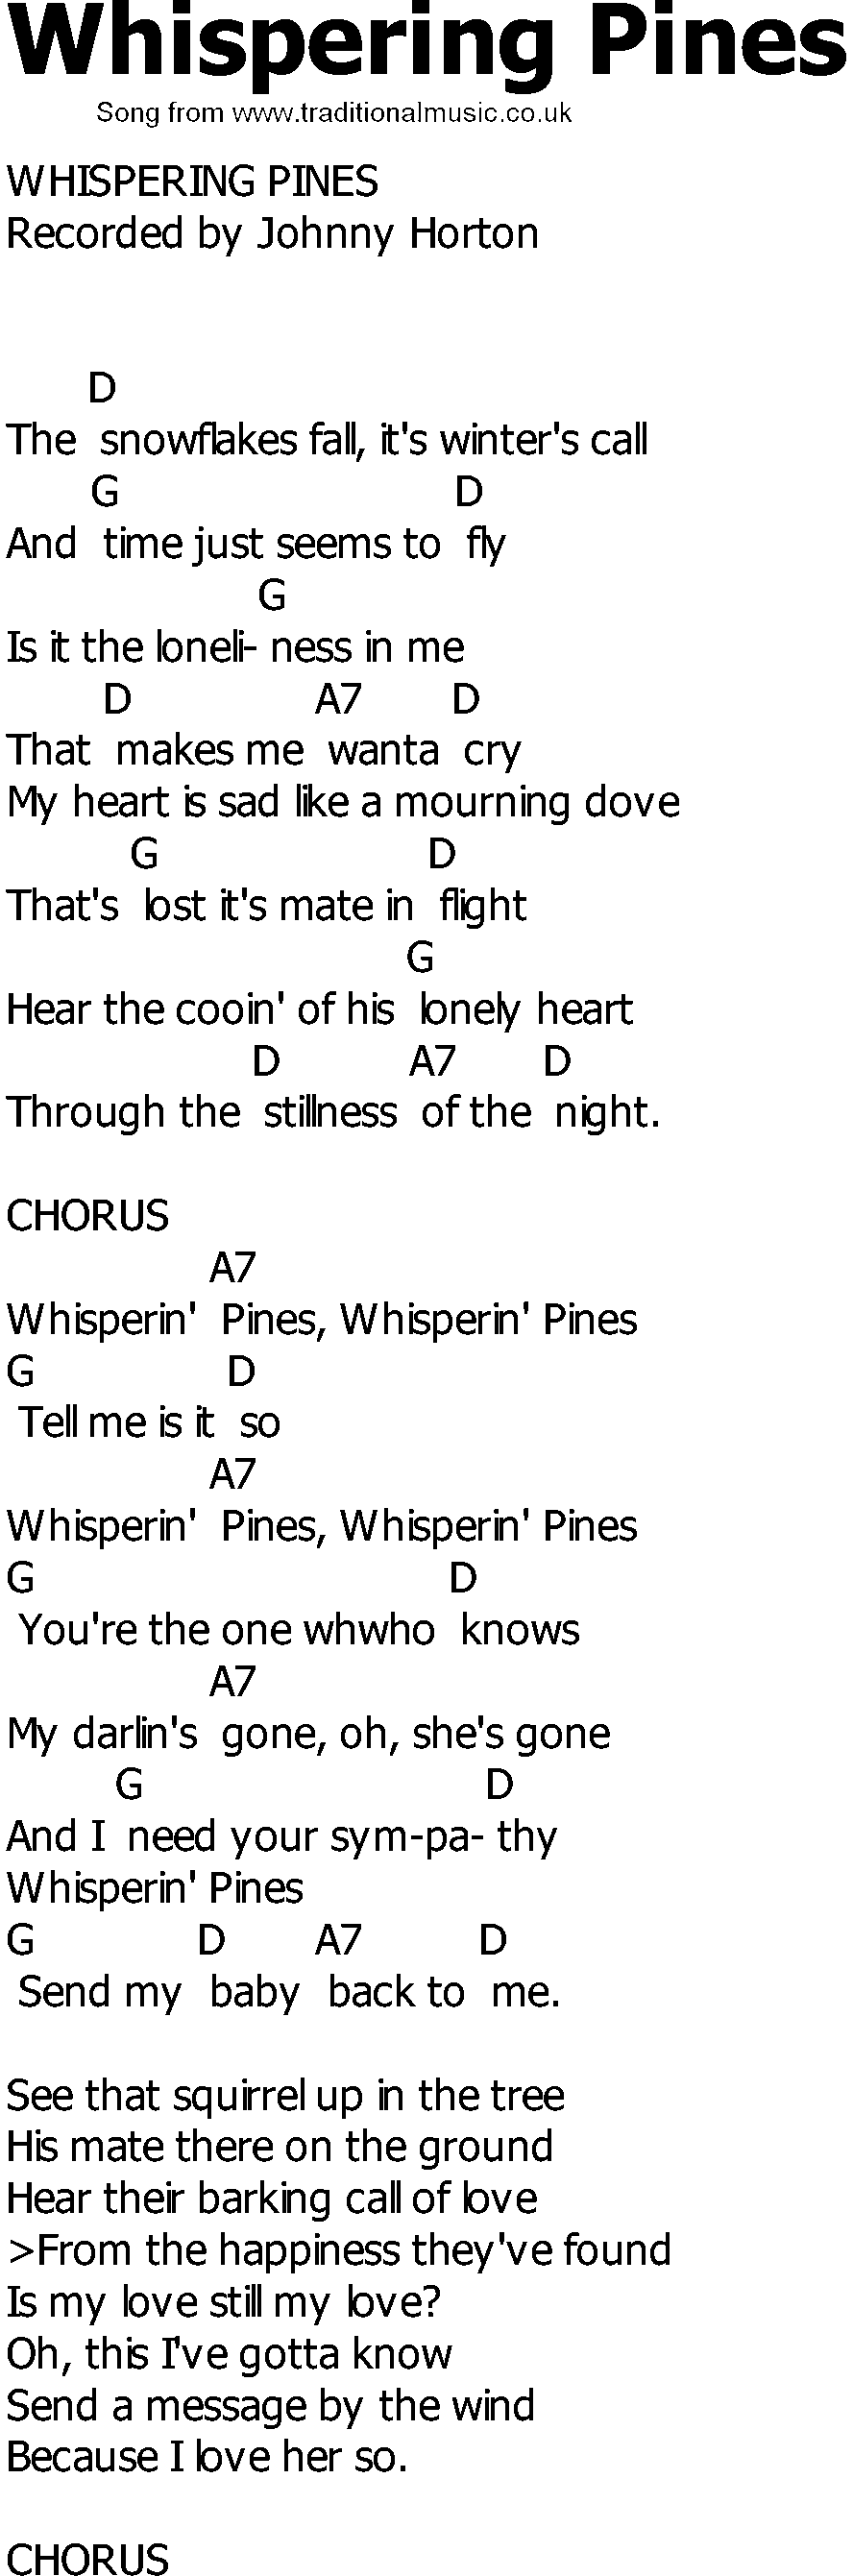 Old Country Song Lyrics With Chords Whispering Pines | Hot Sex Picture